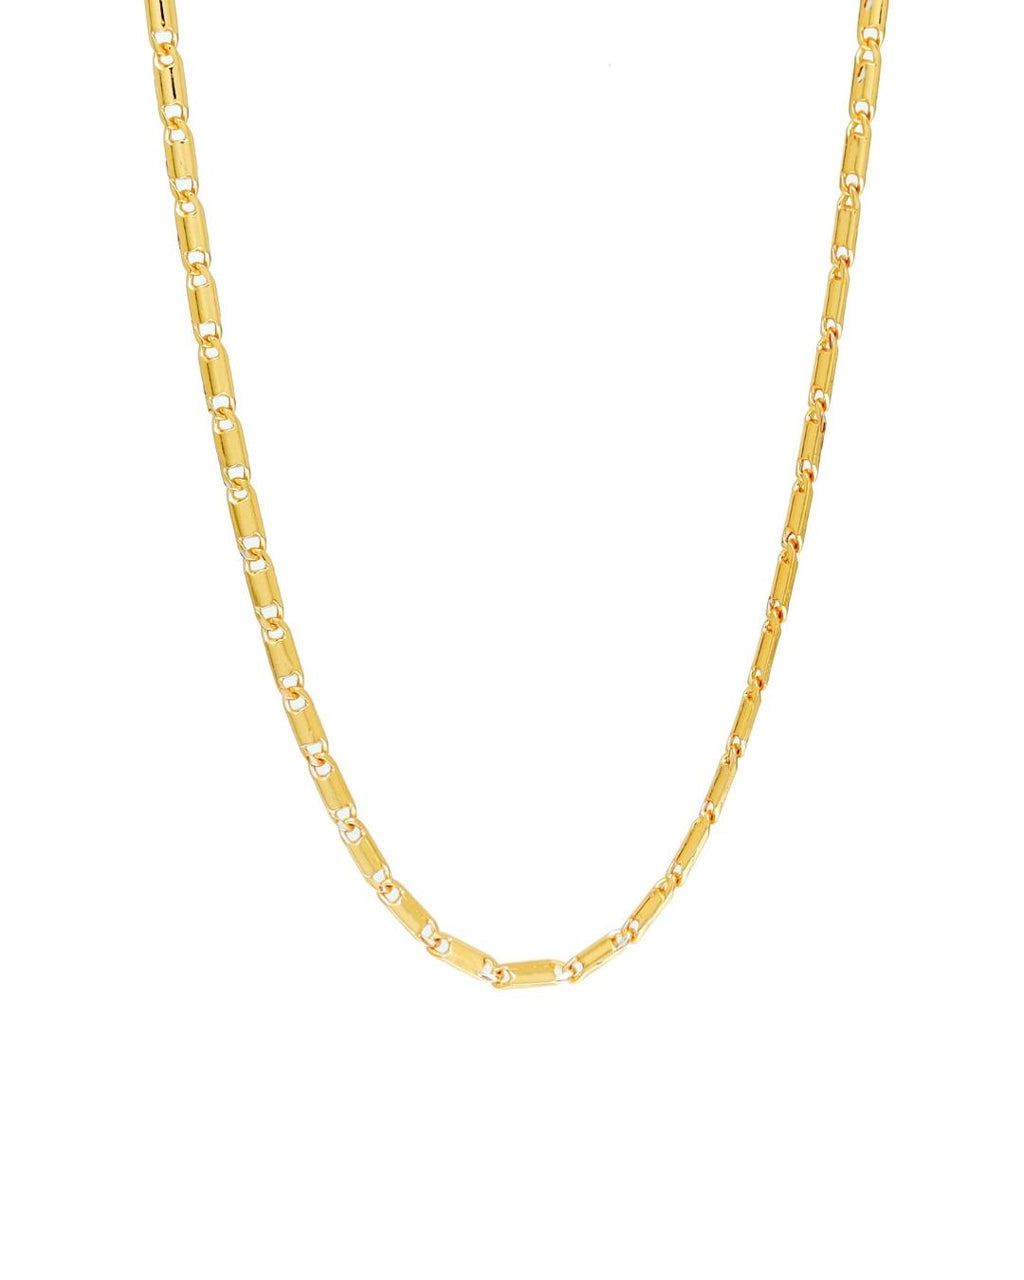 Braided Chain Necklace in Gold - Necklaces - Handcrafted Jewellery - Made in India - Dubai Jewellery, Fashion & Lifestyle - Dori